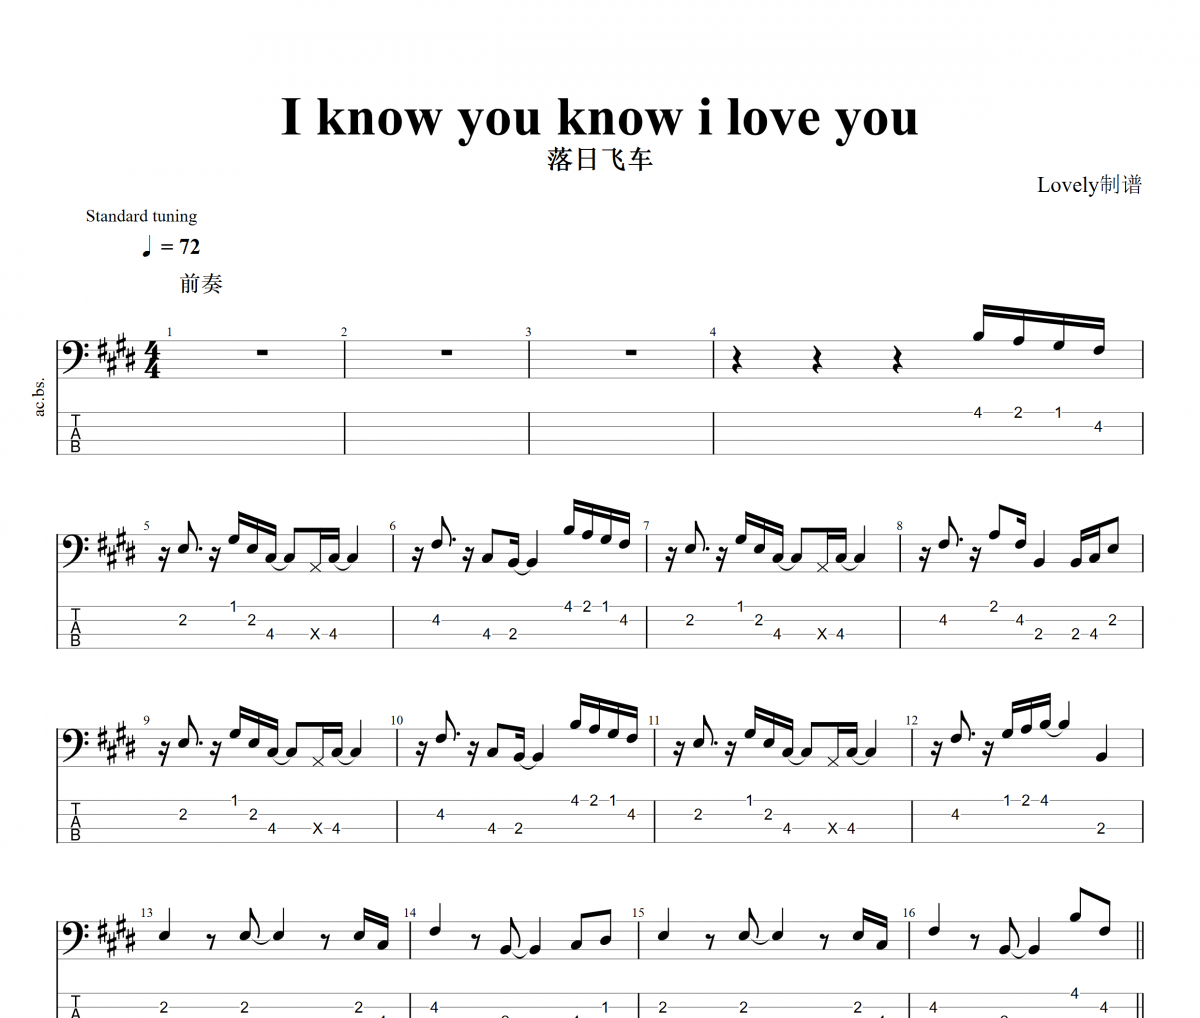 I know you know i love you贝斯谱 落日飞车《I know you know i love yo